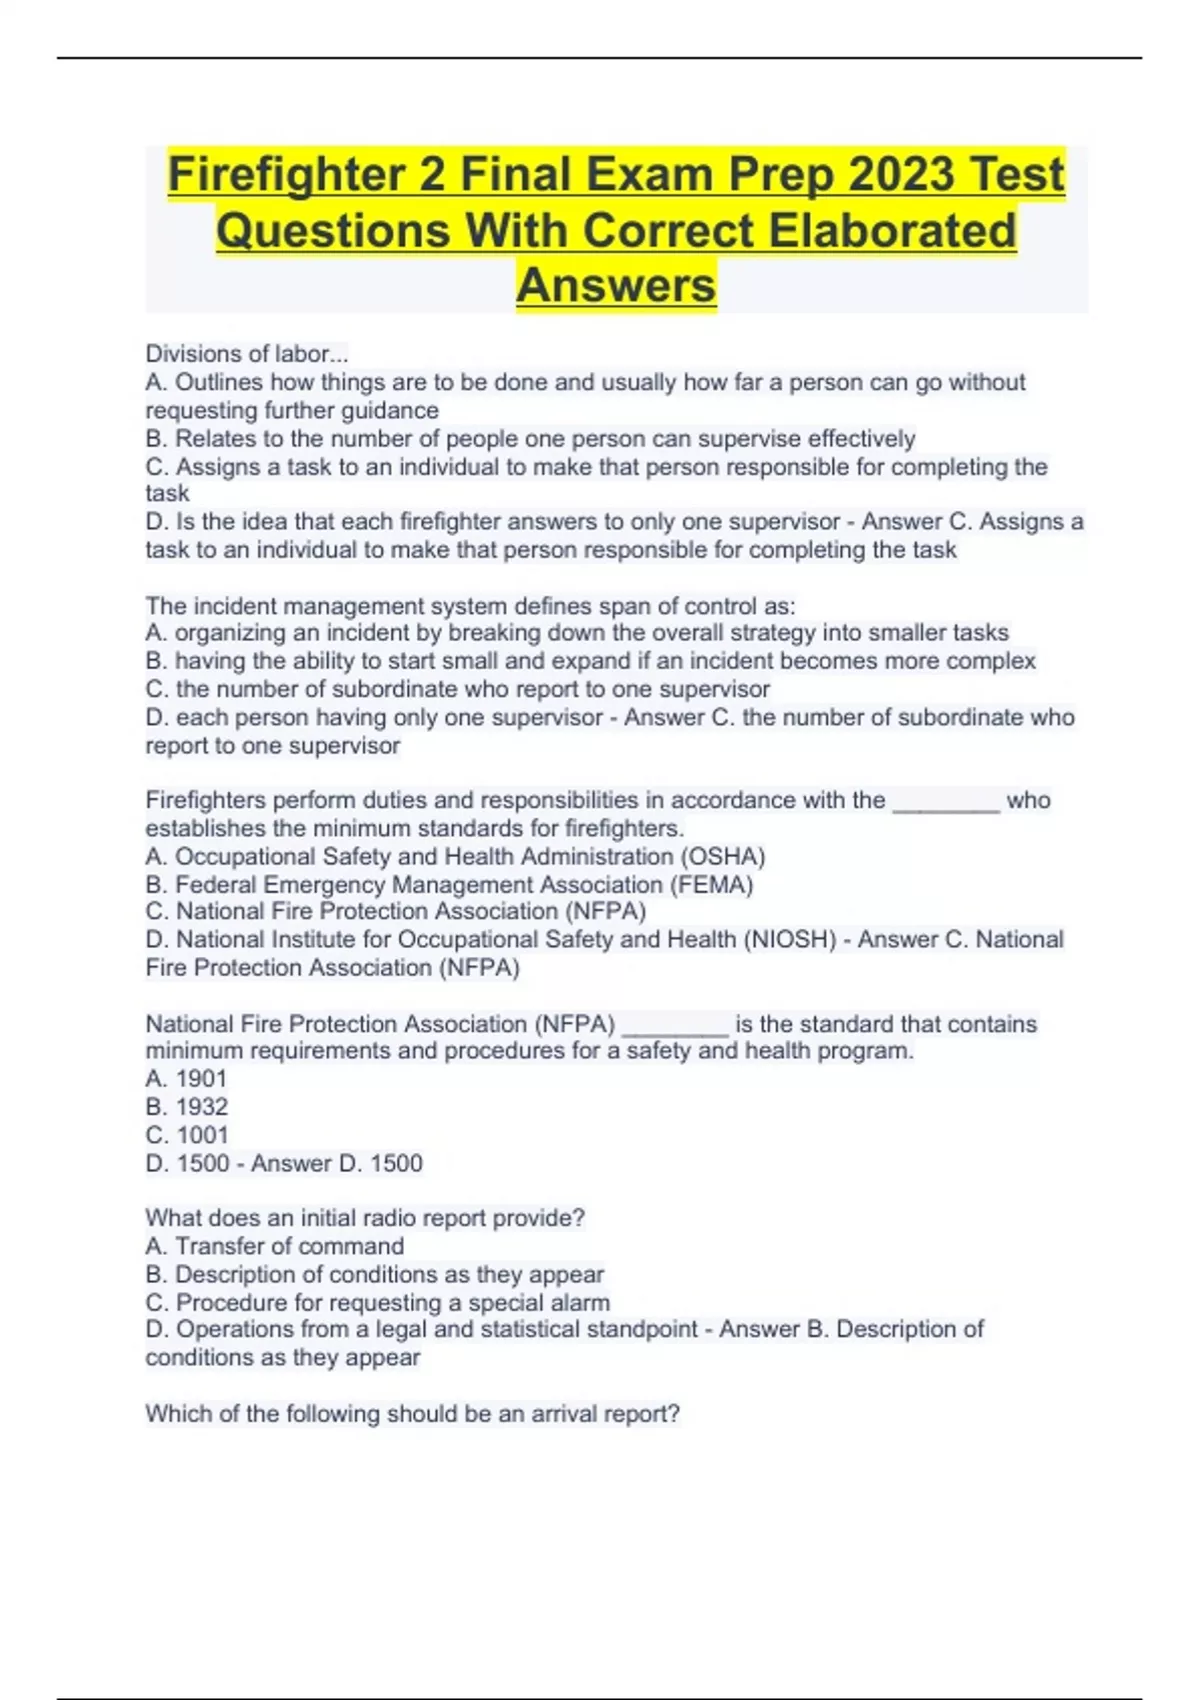 Firefighter 2 Final Exam Prep 2023 Test Questions With Correct